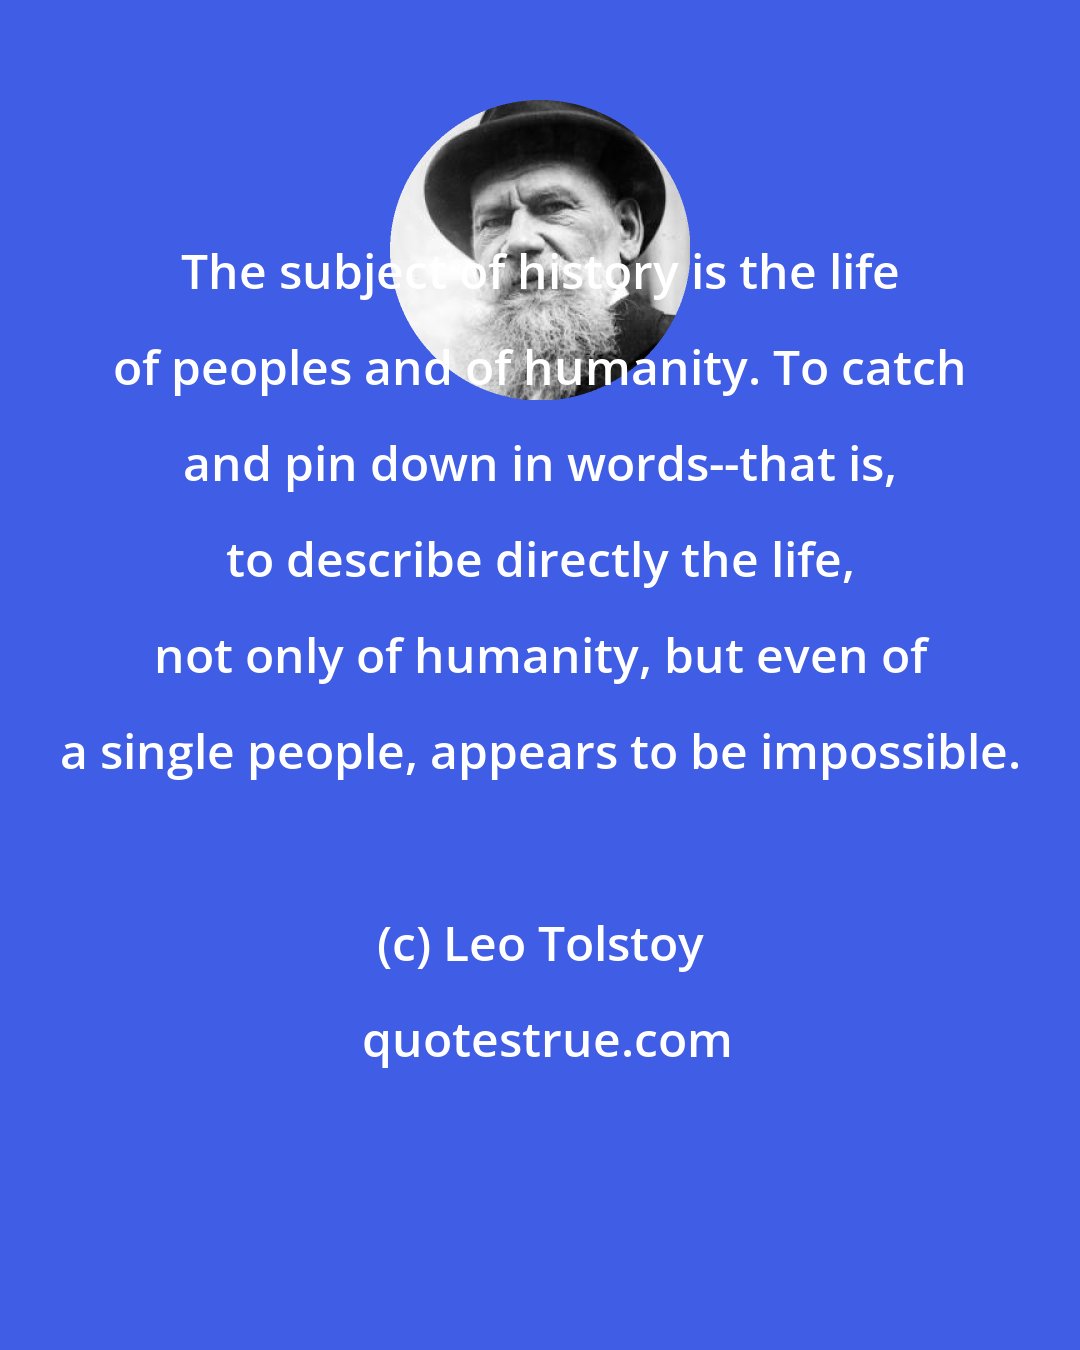 Leo Tolstoy: The subject of history is the life of peoples and of humanity. To catch and pin down in words--that is, to describe directly the life, not only of humanity, but even of a single people, appears to be impossible.